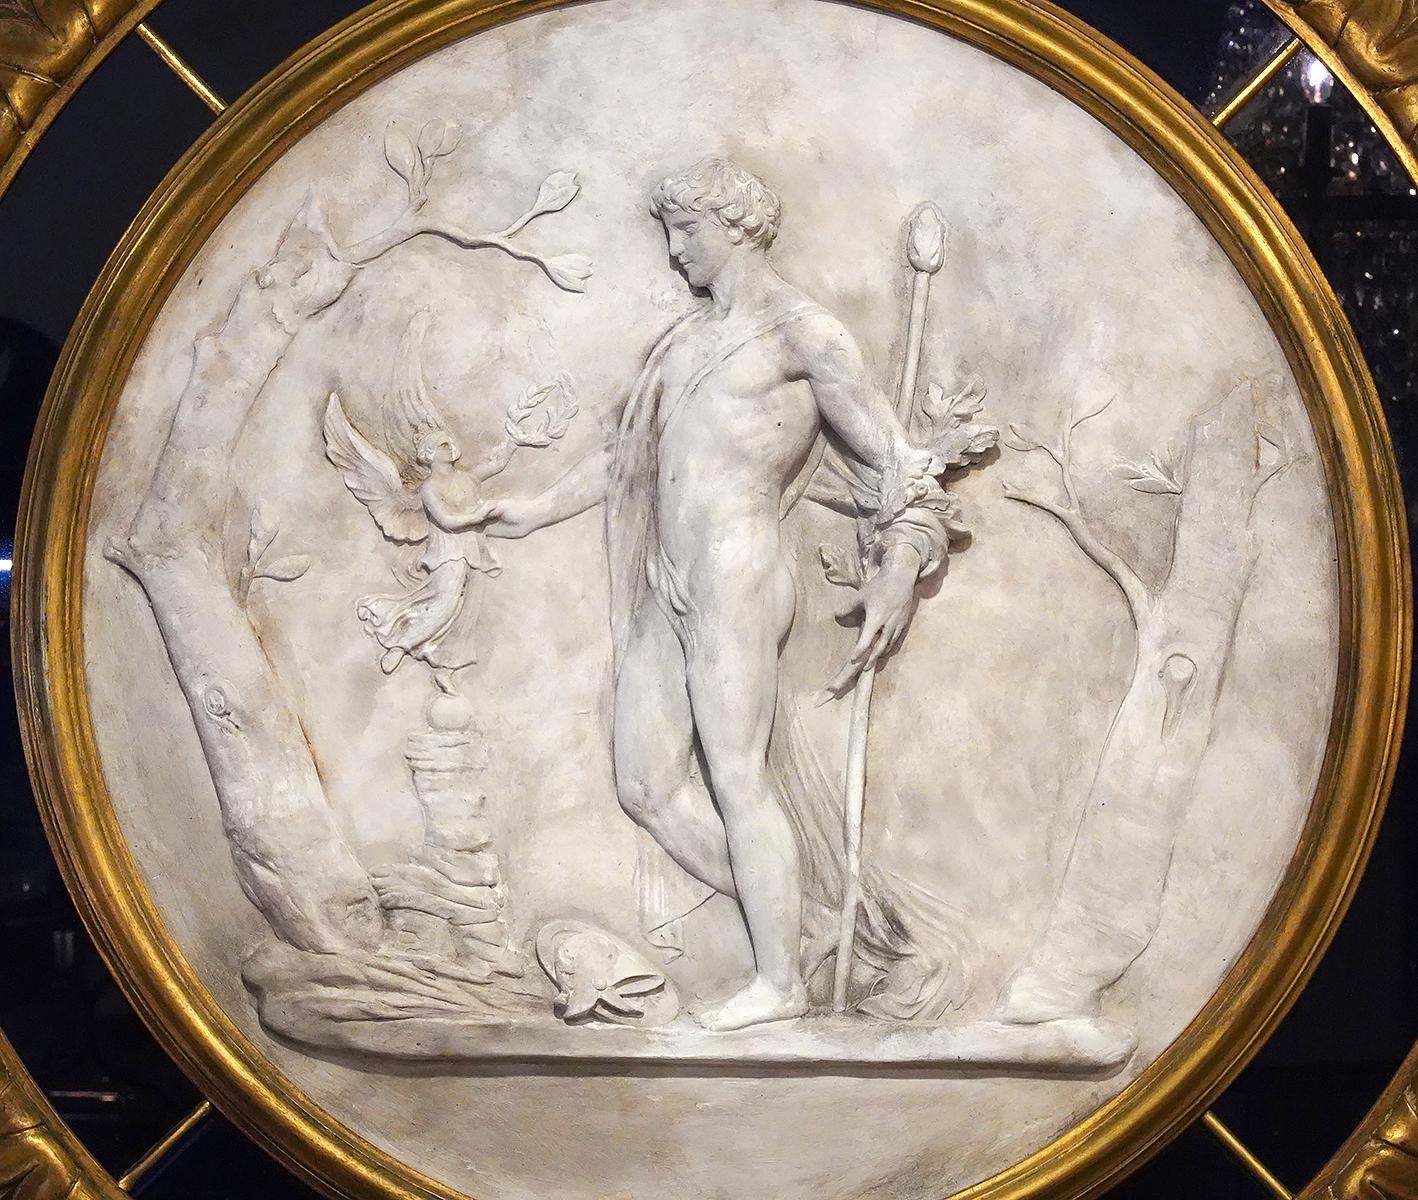 This Italian classical plaster relief likely after a marble original depicts a Roman hero, his shield and helmet on the ground, being offered a laurel wreath from an angel standing on a small sphere. The motif is flanked by rudimentary trees. The